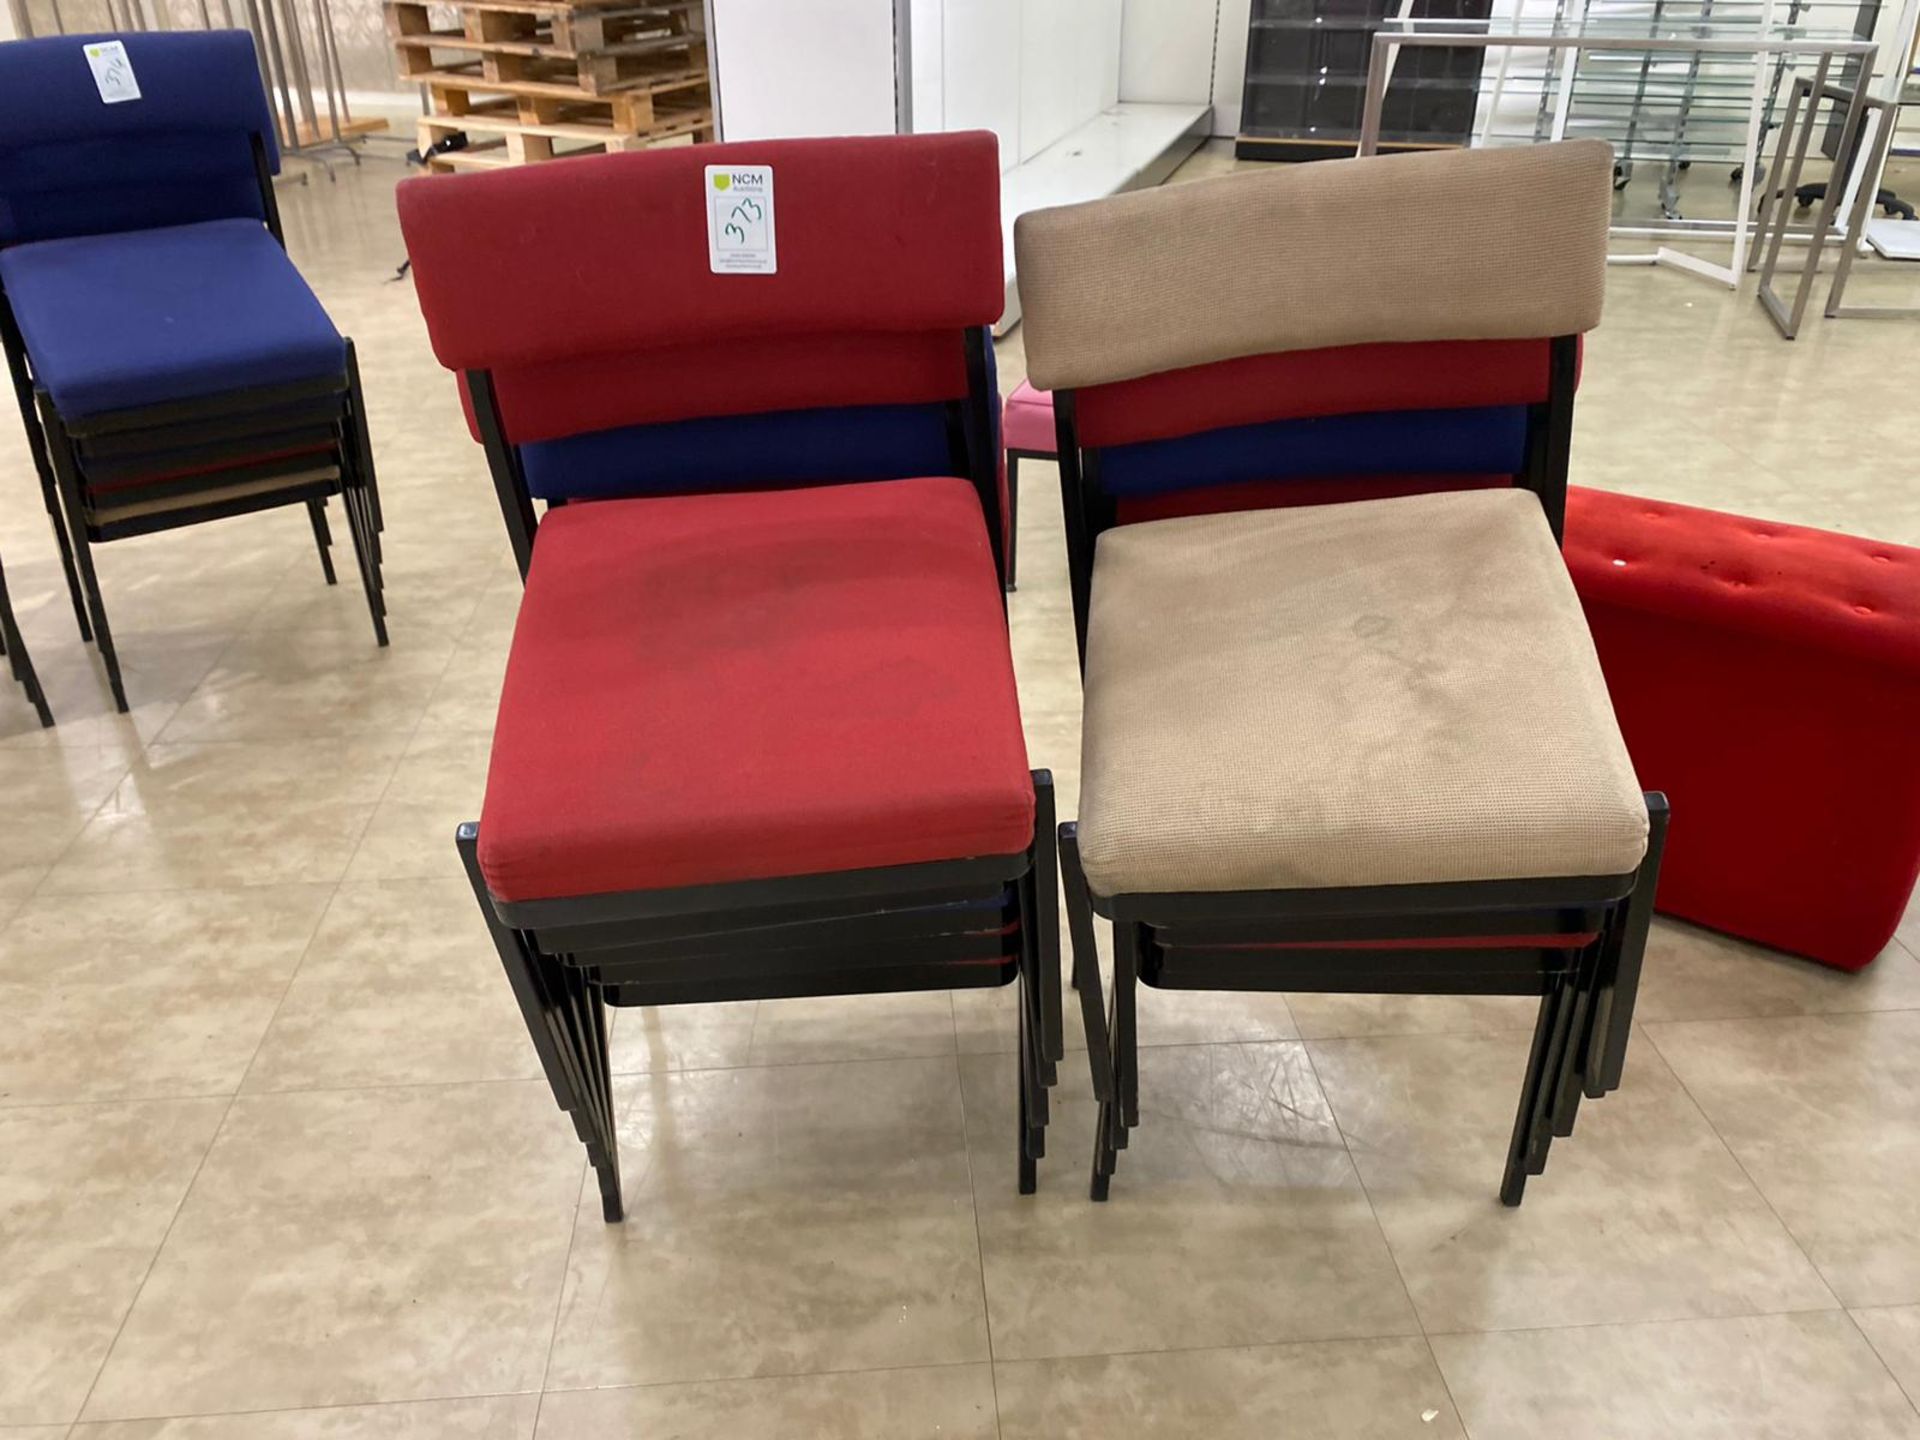 Lot Of 10 Miscellaneous Chairs Of Varying Colours - Image 2 of 2